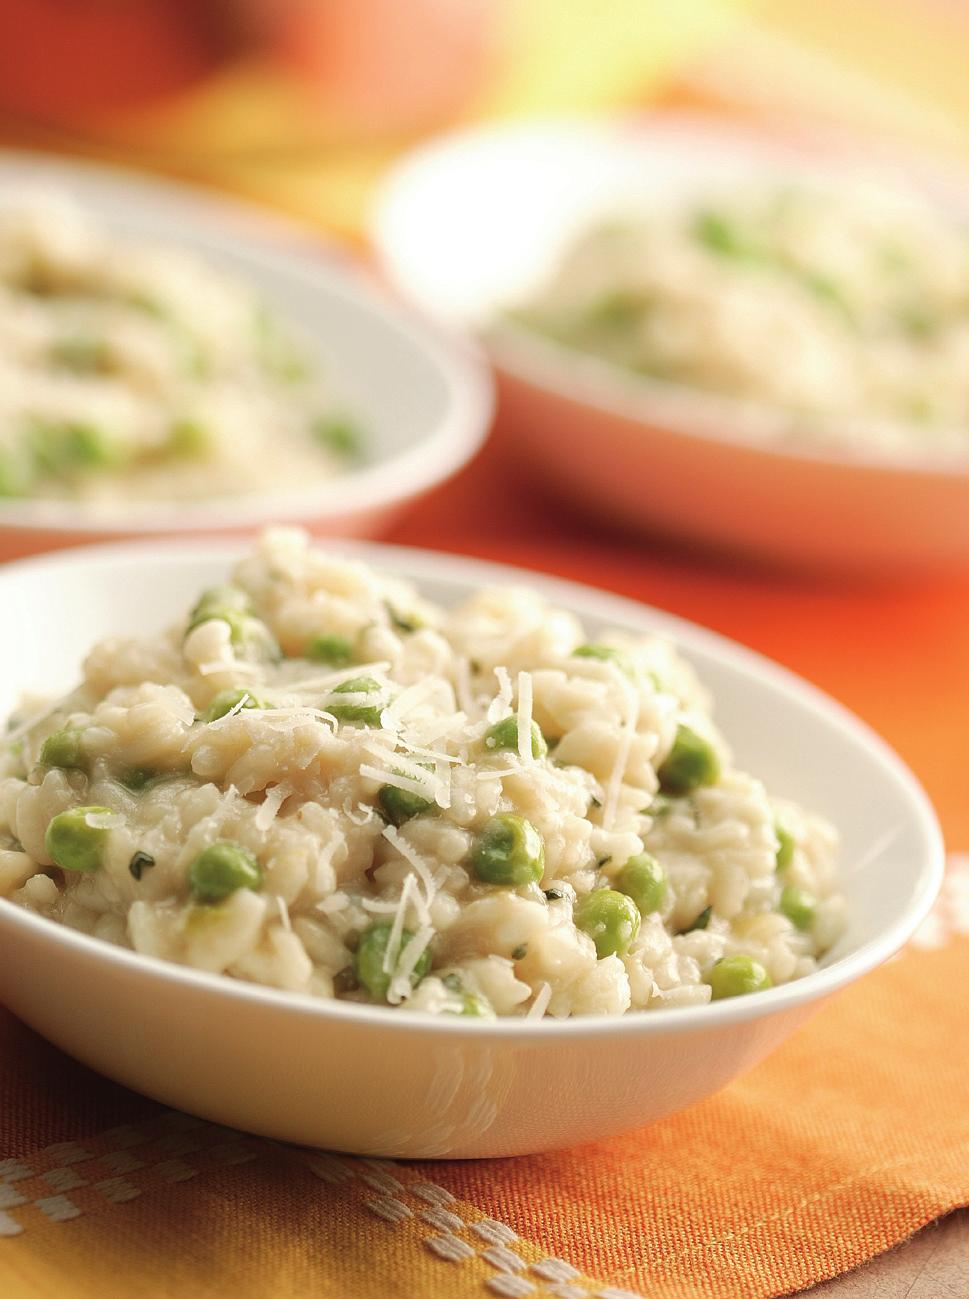 Risotto with Peas, Mint & Lemon Serves six as a side dish or four as a main course. 5 to 6 cups low-salt chicken broth 4 Tbs.